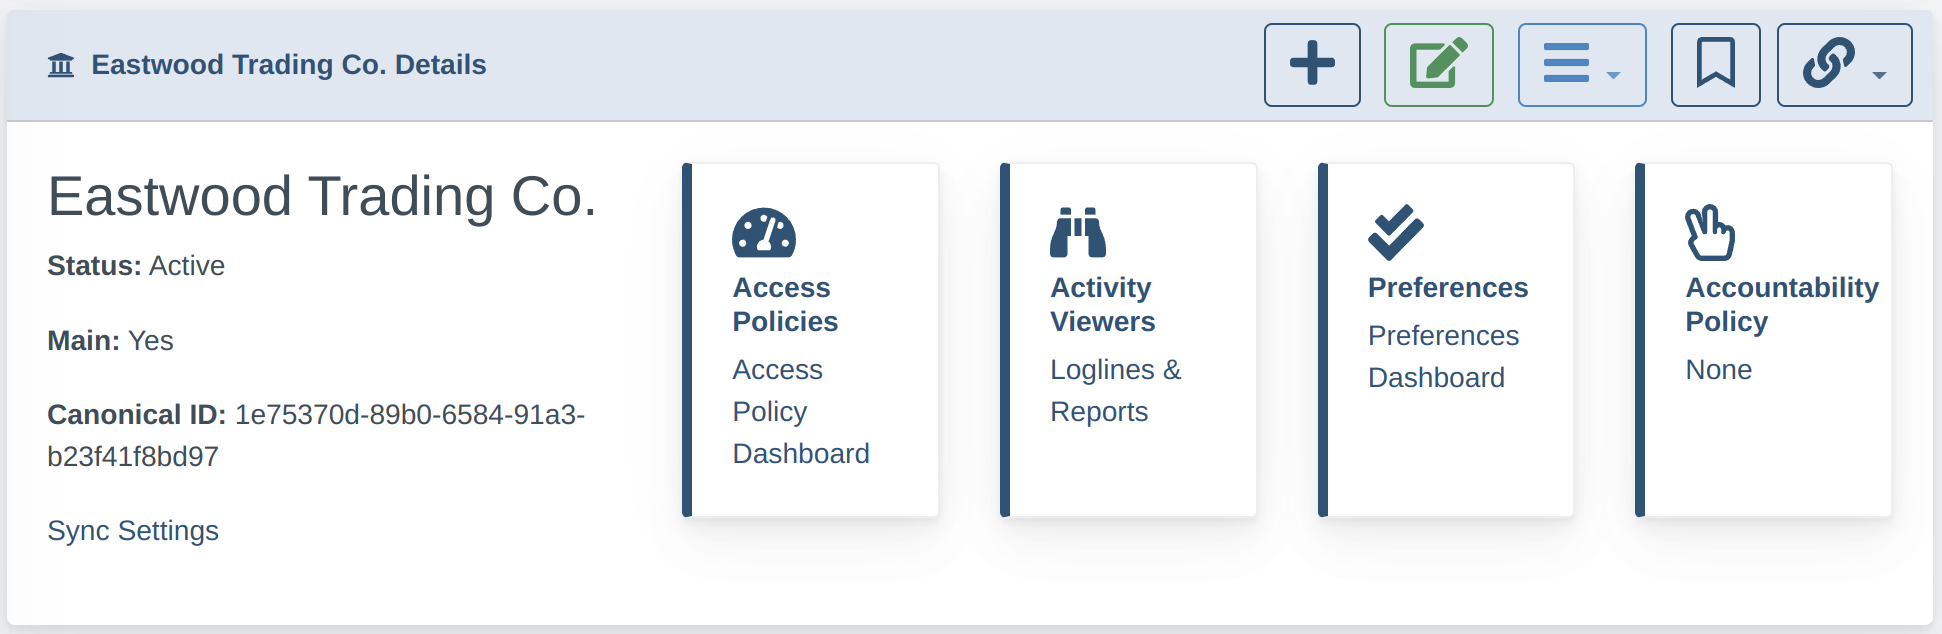 company-record-access-policy-dashboard-button.png